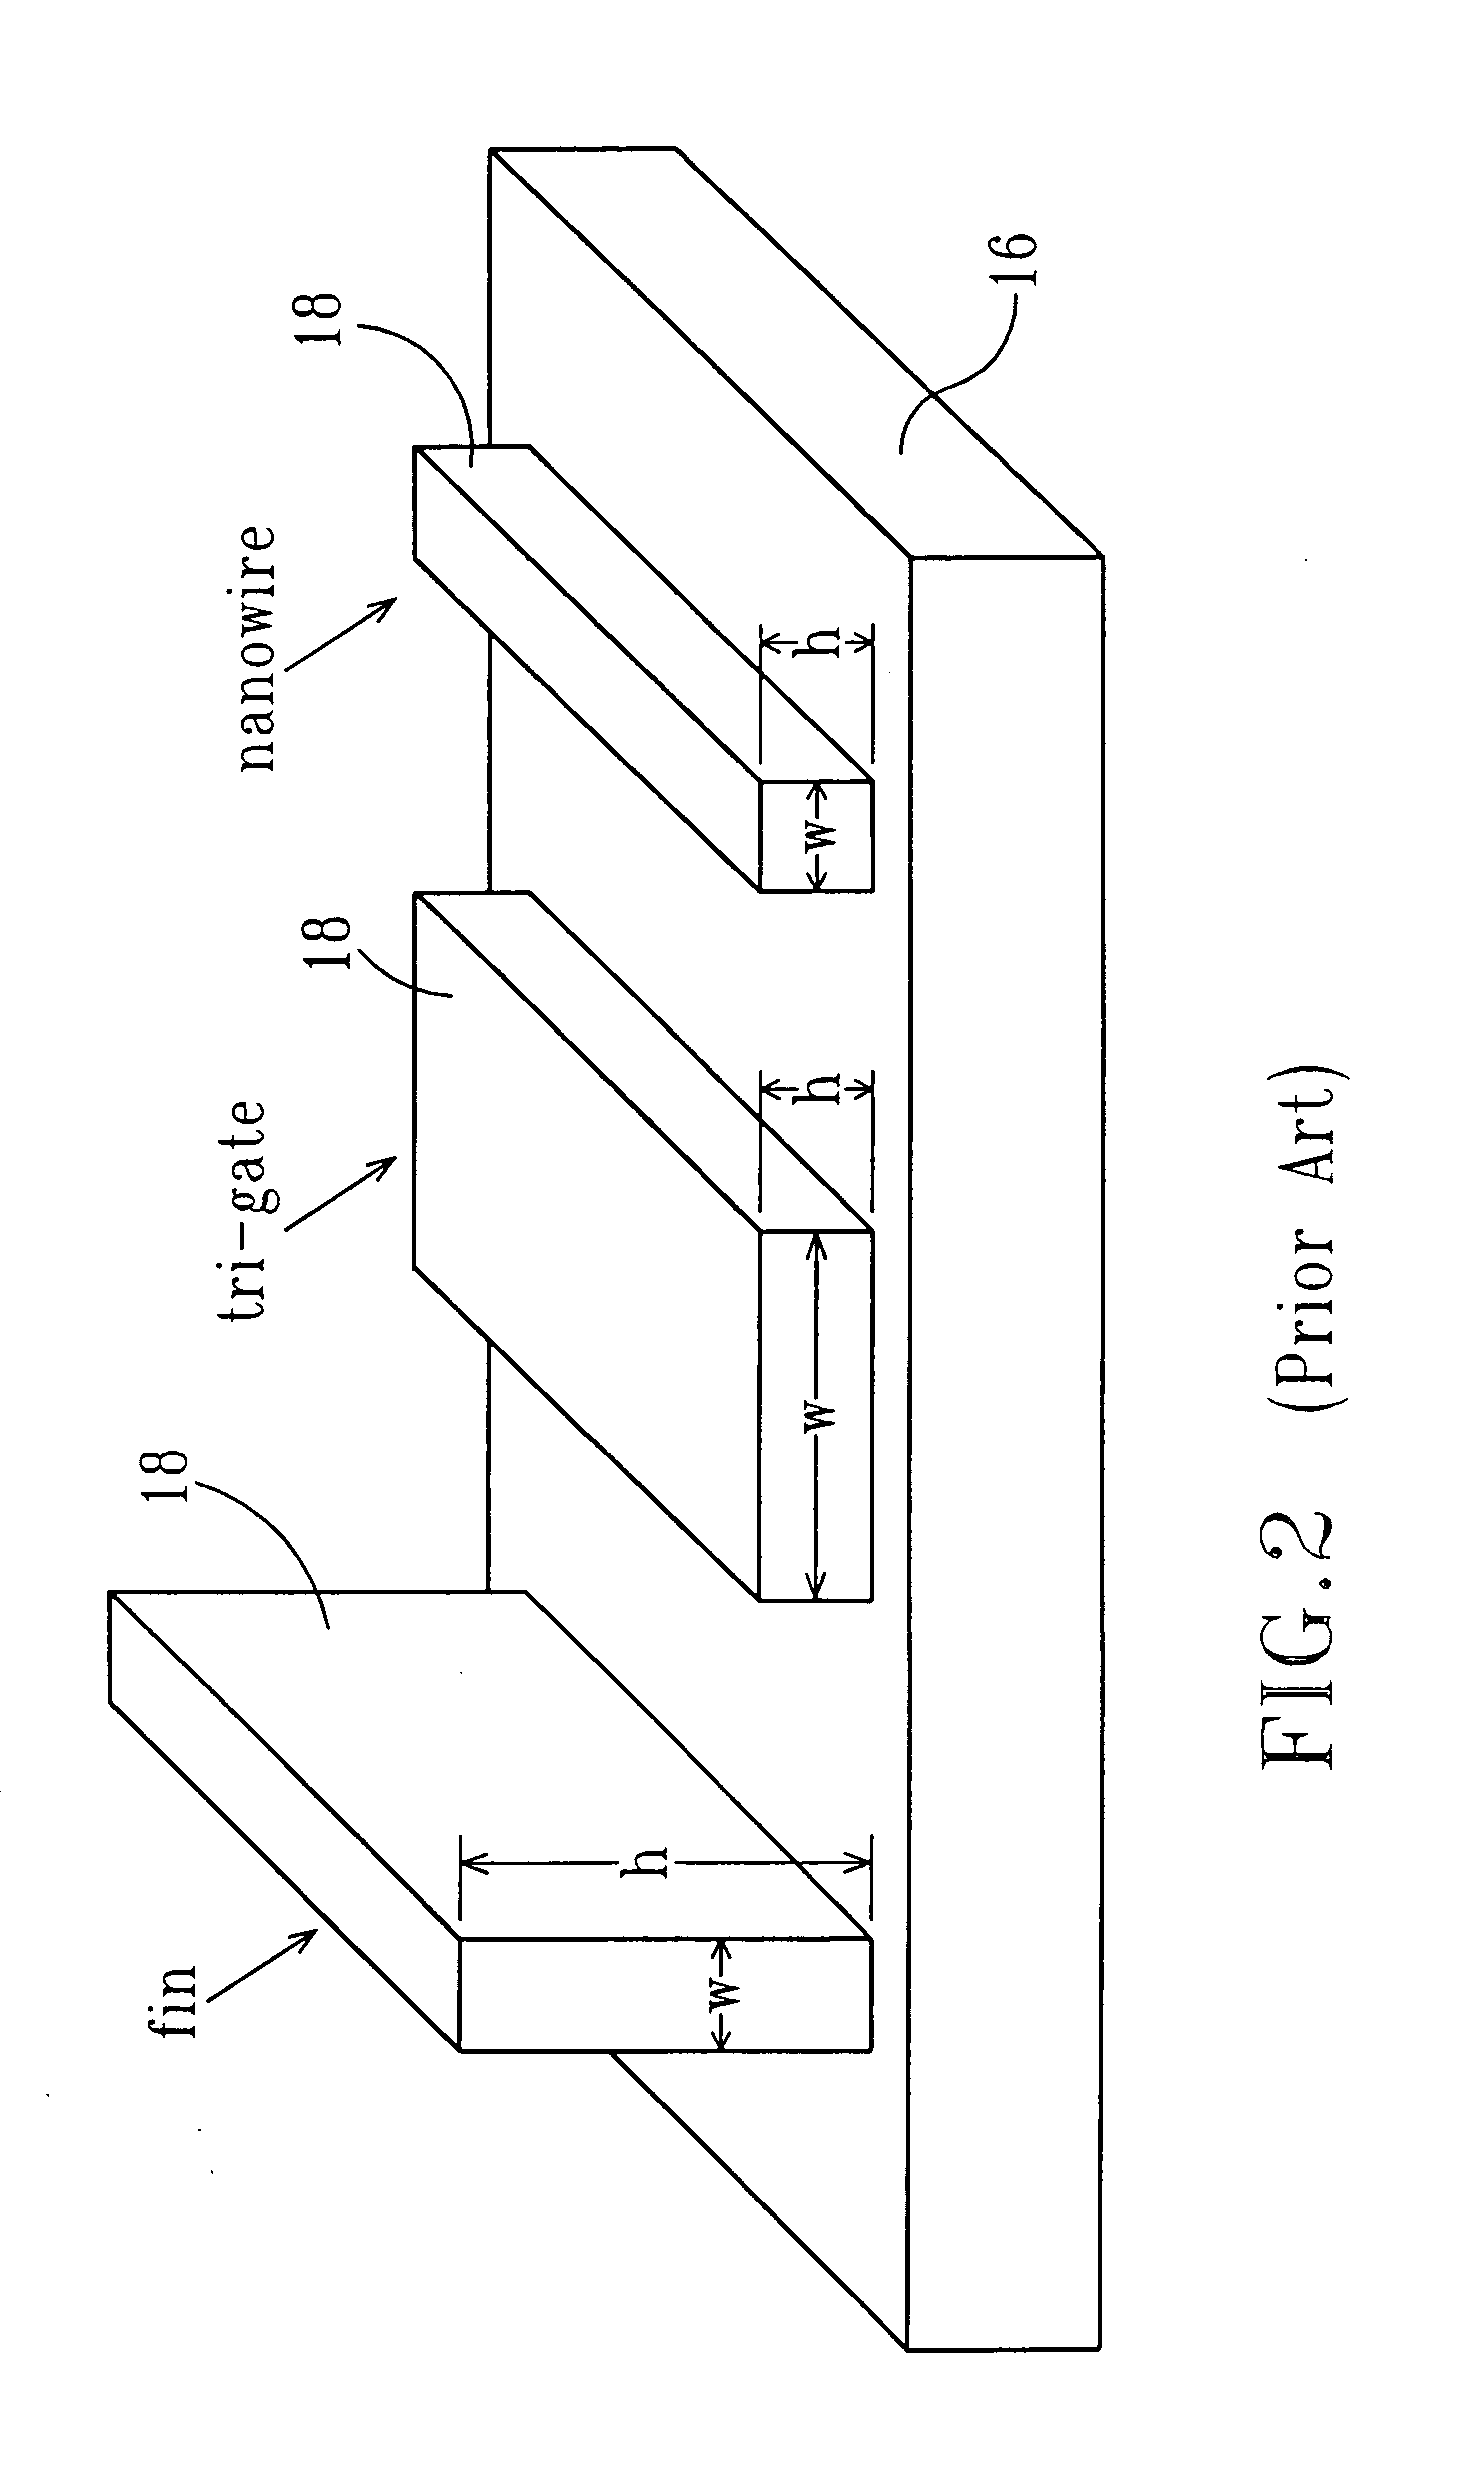 Field effect transistor device including an array of channel elements and methods for forming